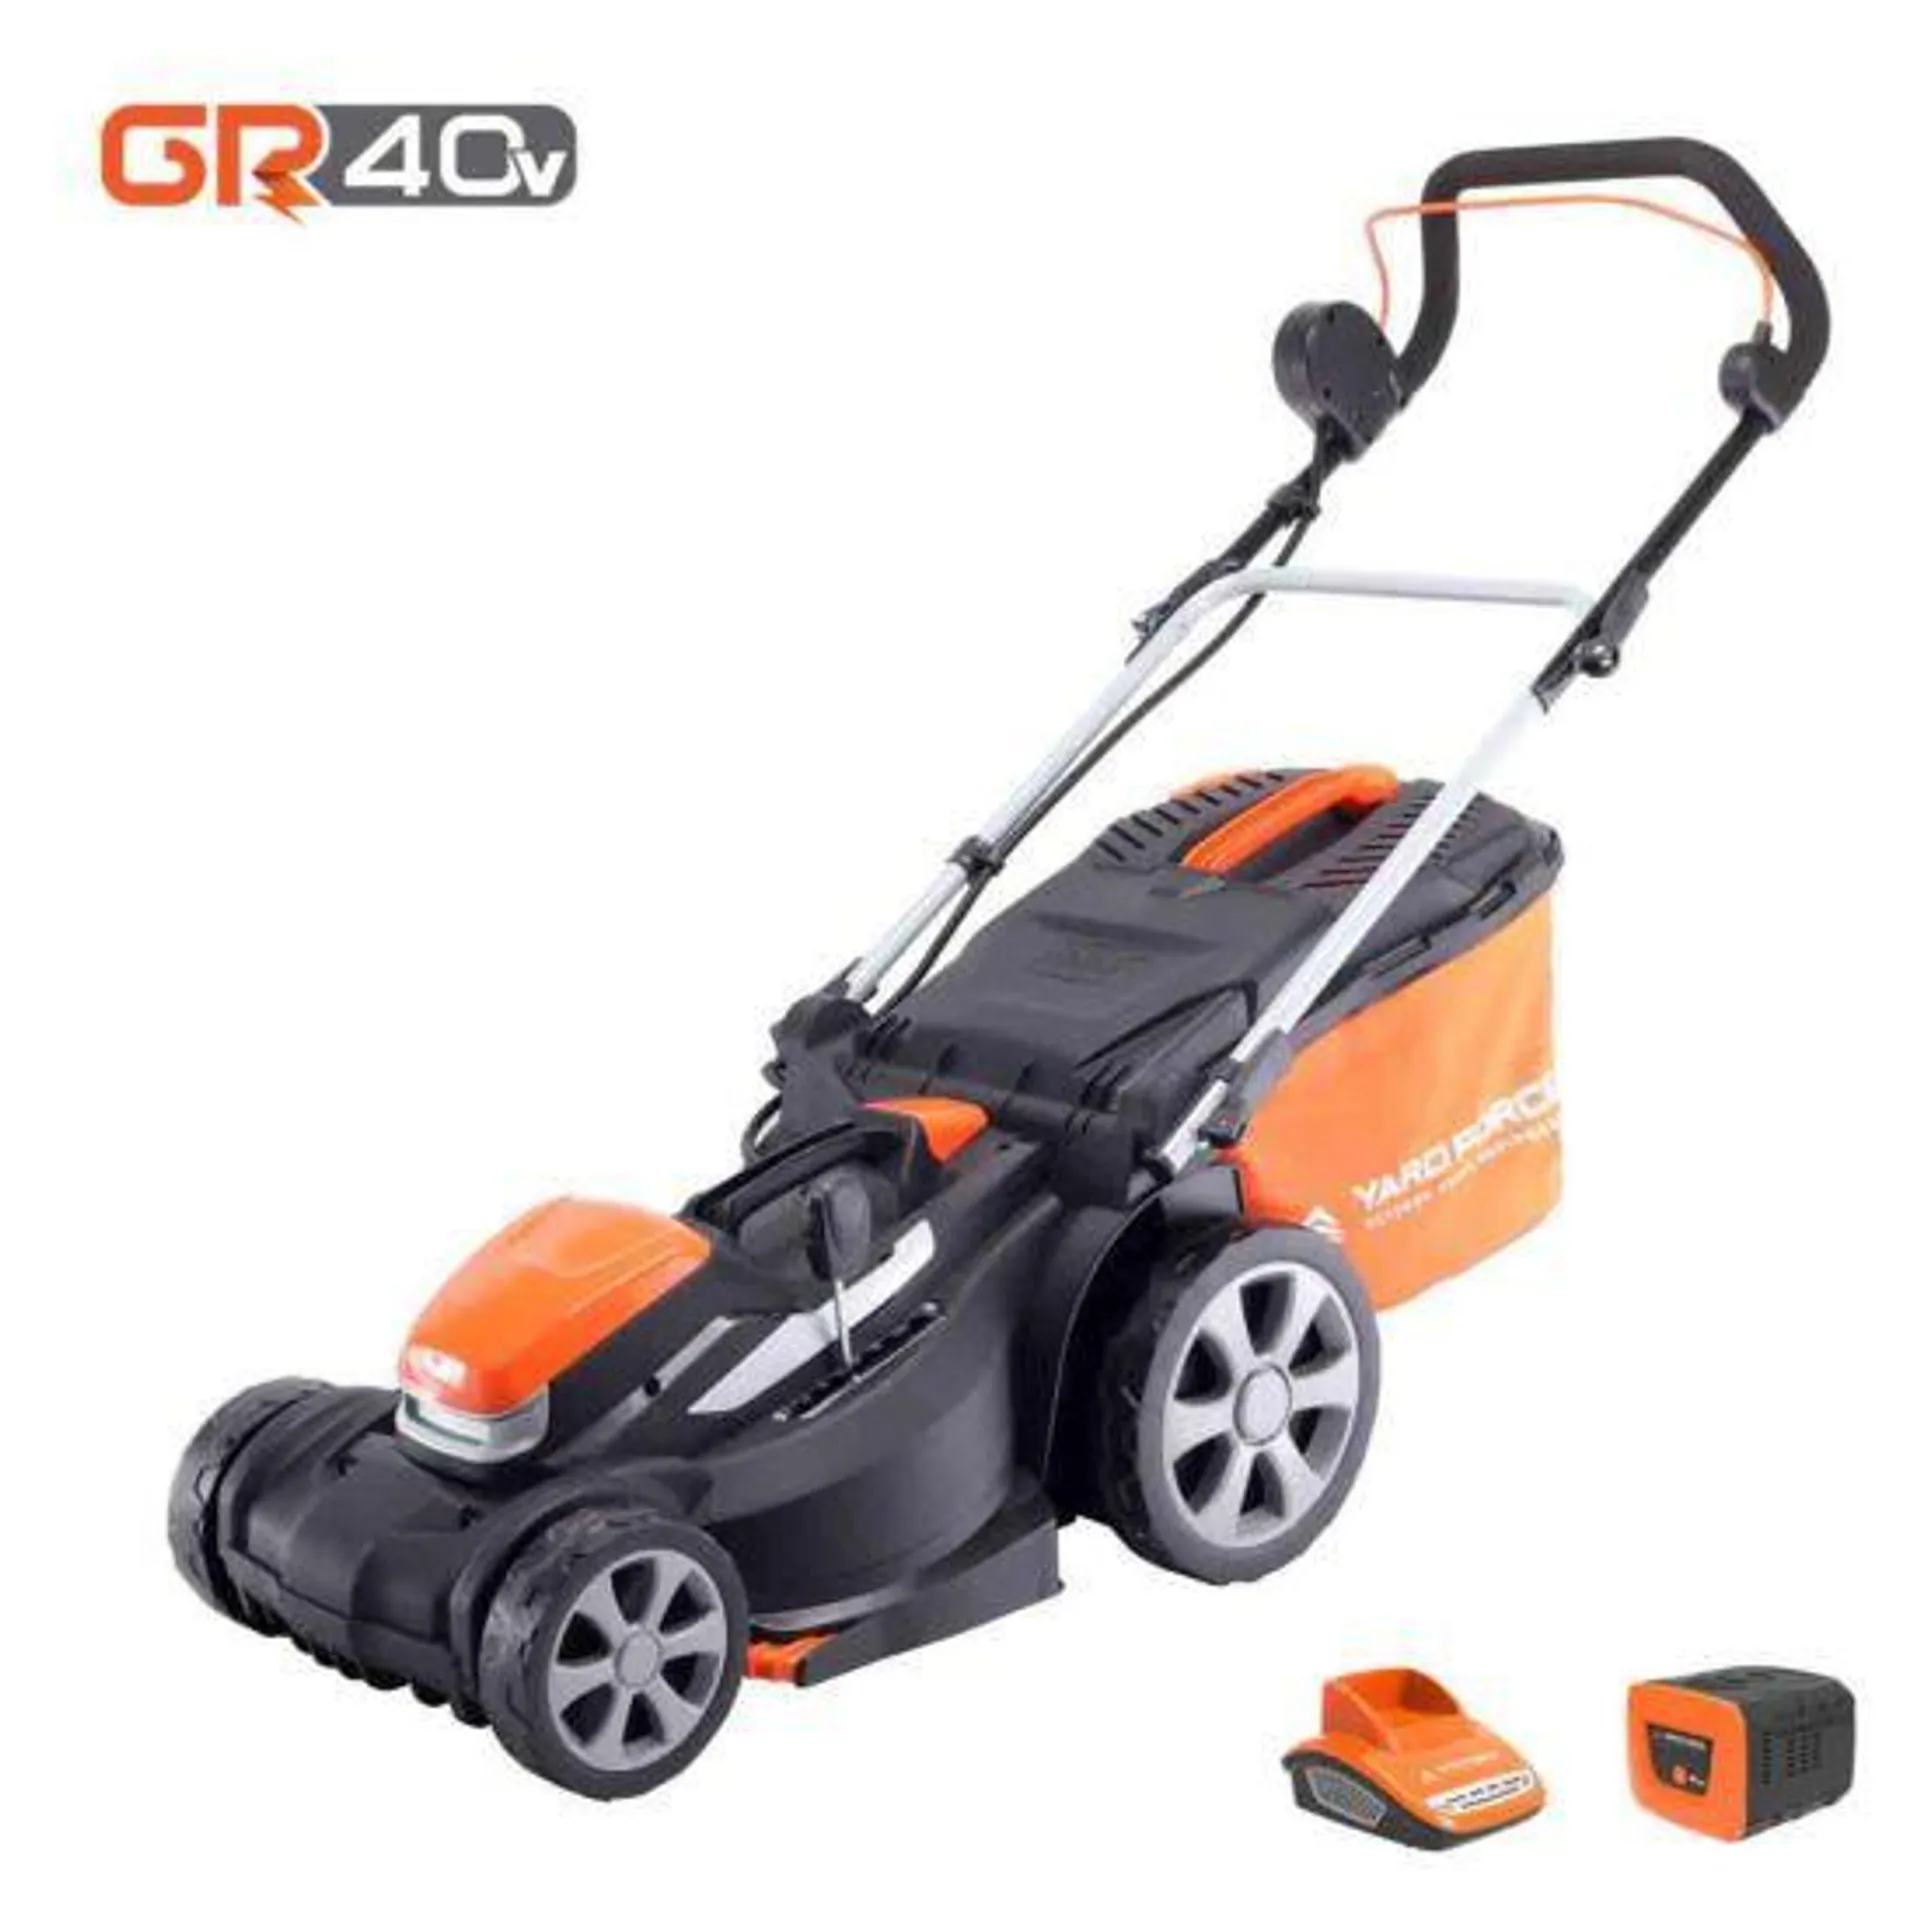 Yard Force 40V 37Cm Cordless Lawnmower W/ 2.5Ah Lithium-ion Battery & Quick Charger - Orange